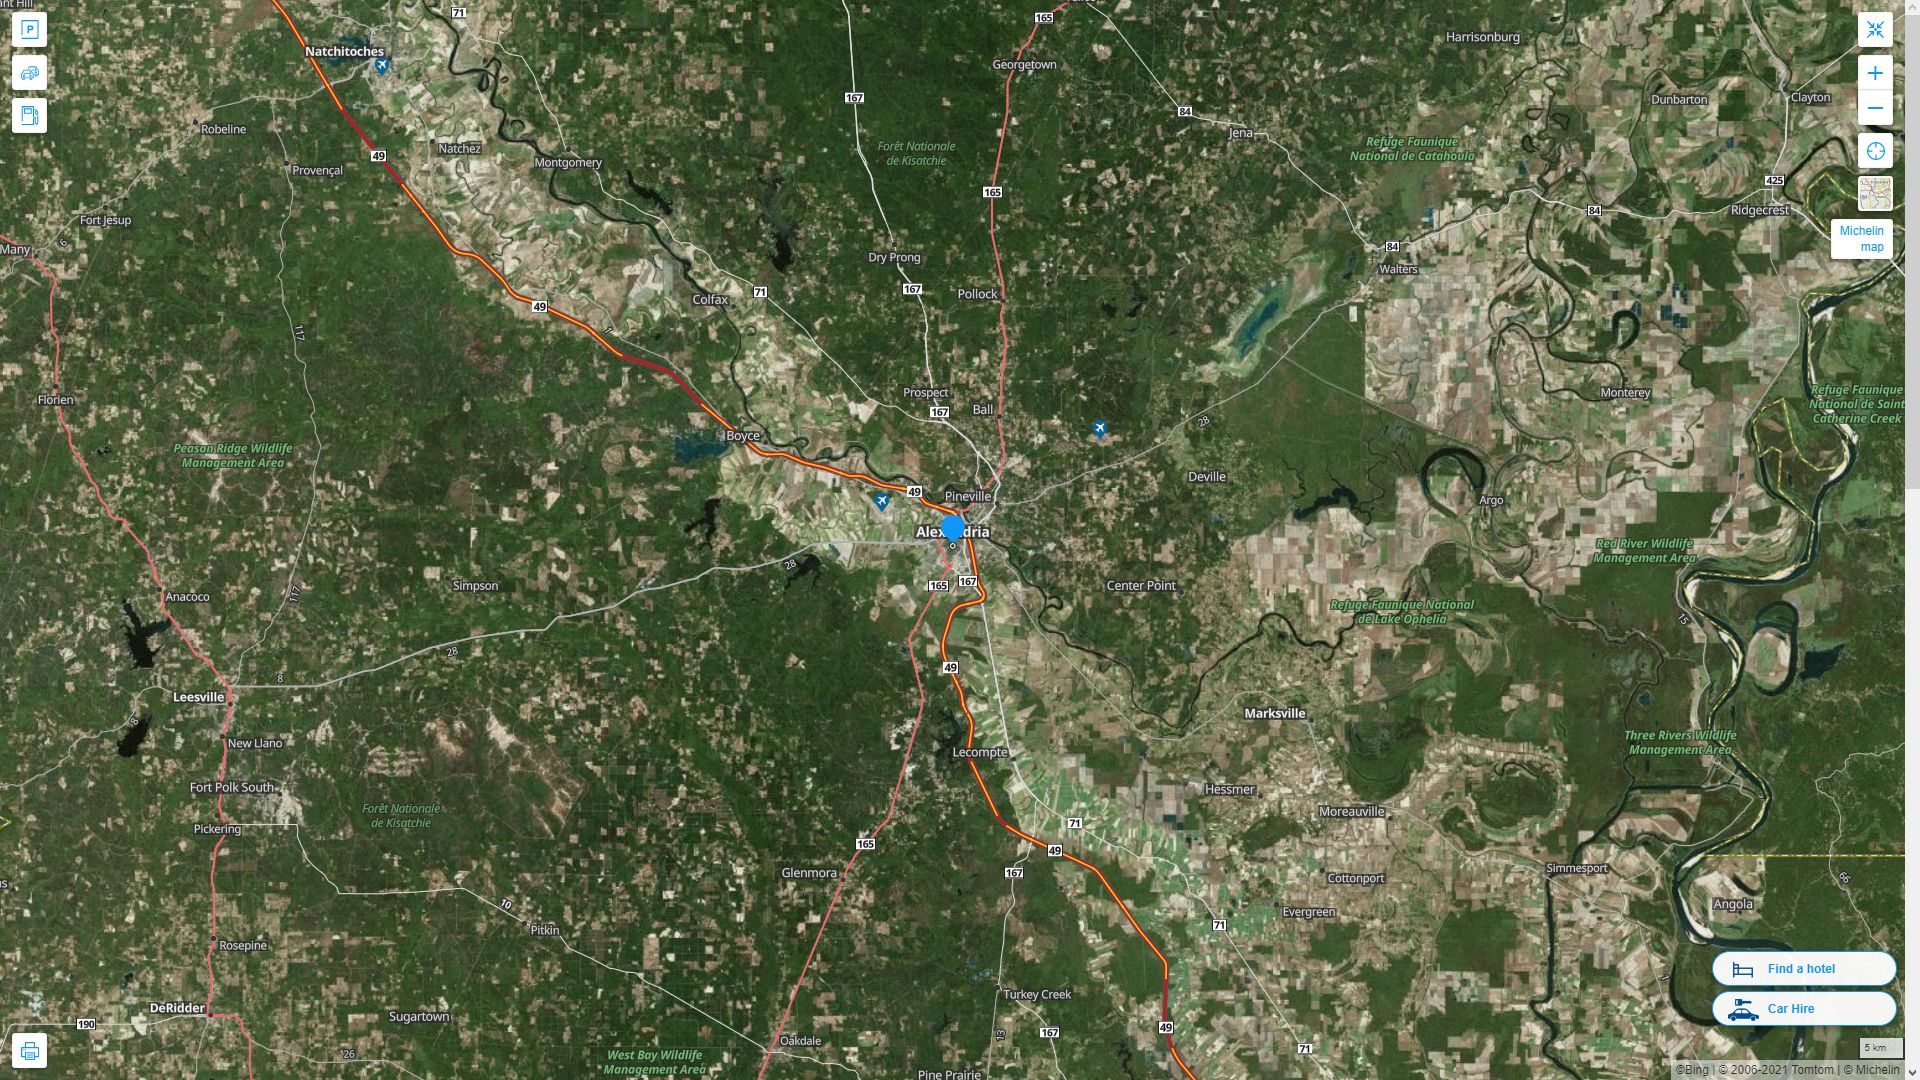 Alexandria Louisiana Highway and Road Map with Satellite View